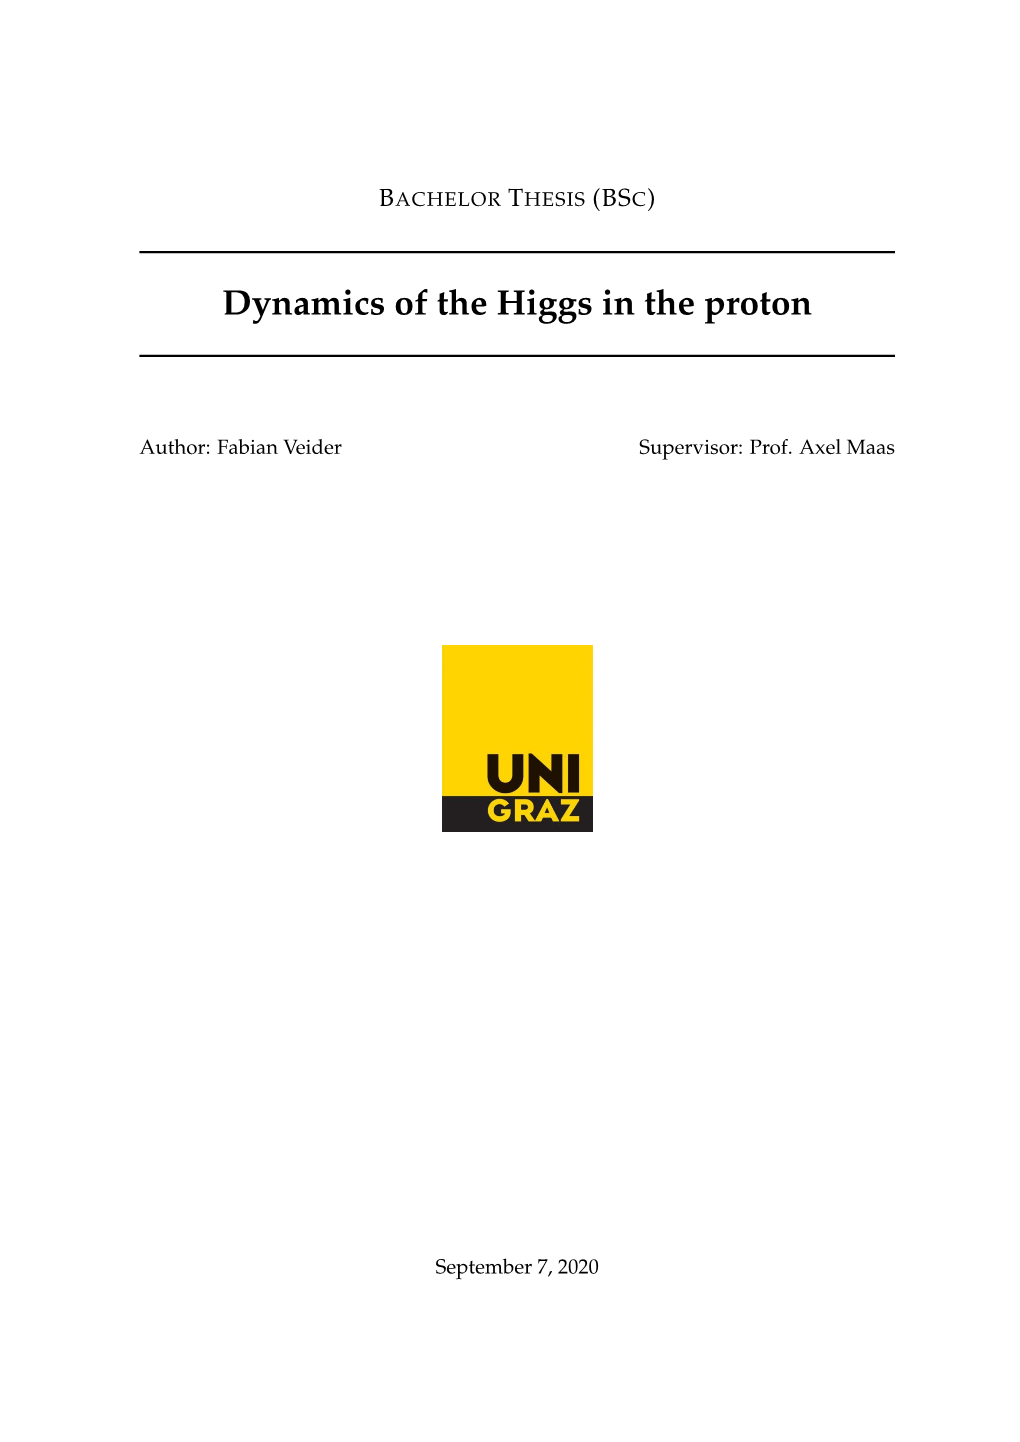 Dynamics of the Higgs in the Proton